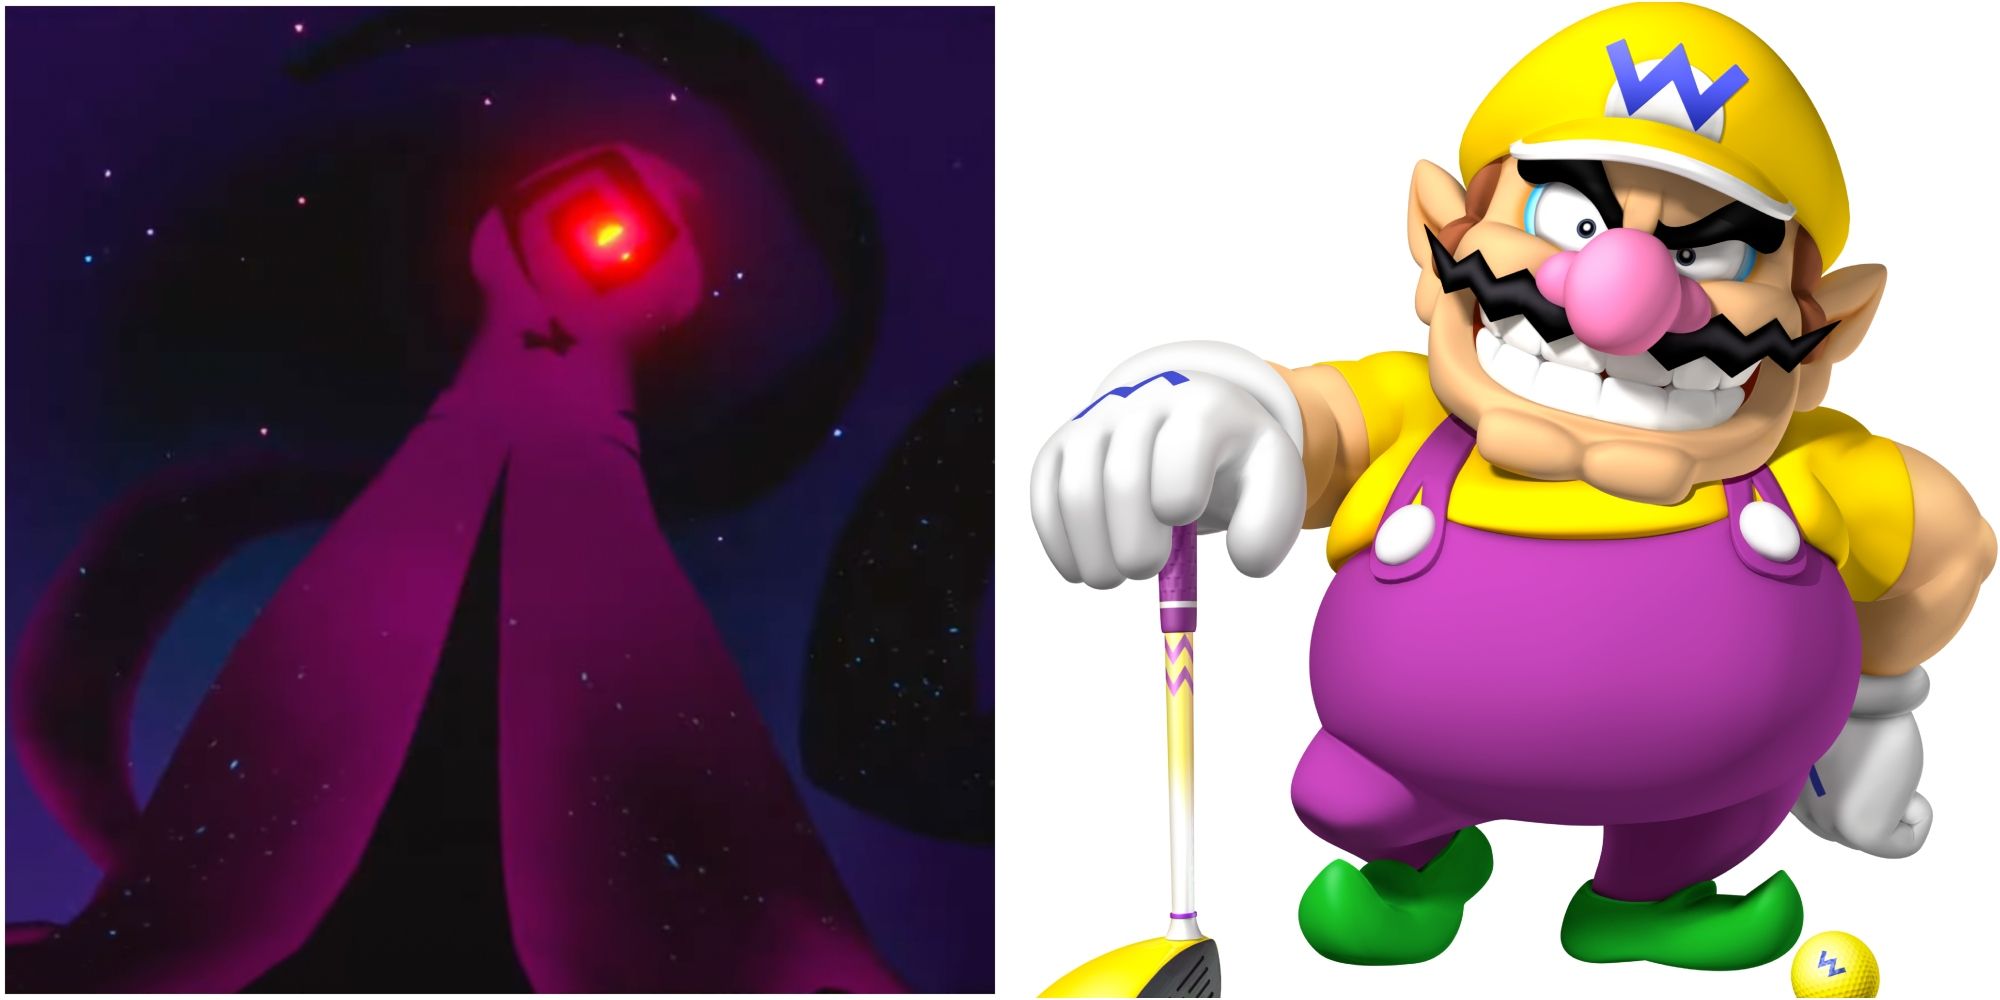 Cursa, a hooded purple figure from Mario + Rabbids Sparks of Hope and Wario holding a purple and yellow golf club